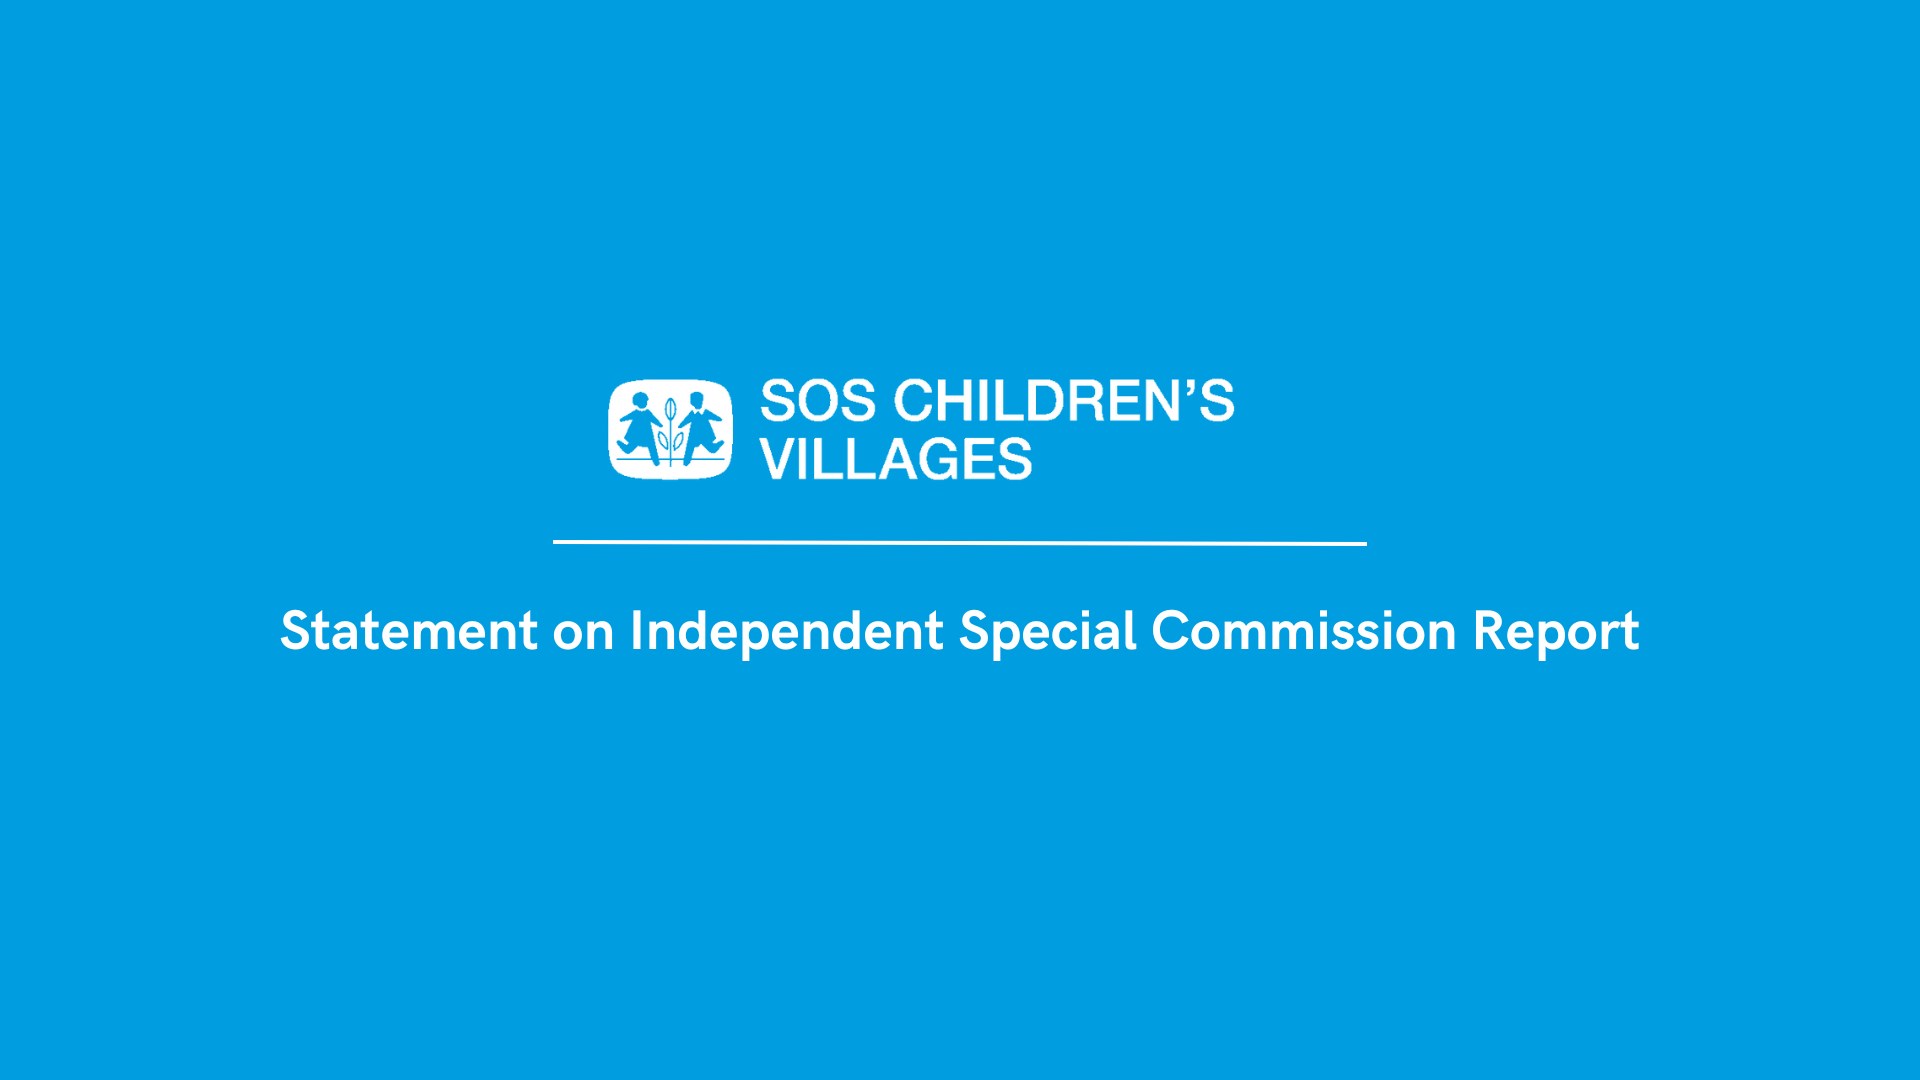 Statement on Independent Special Commission Report